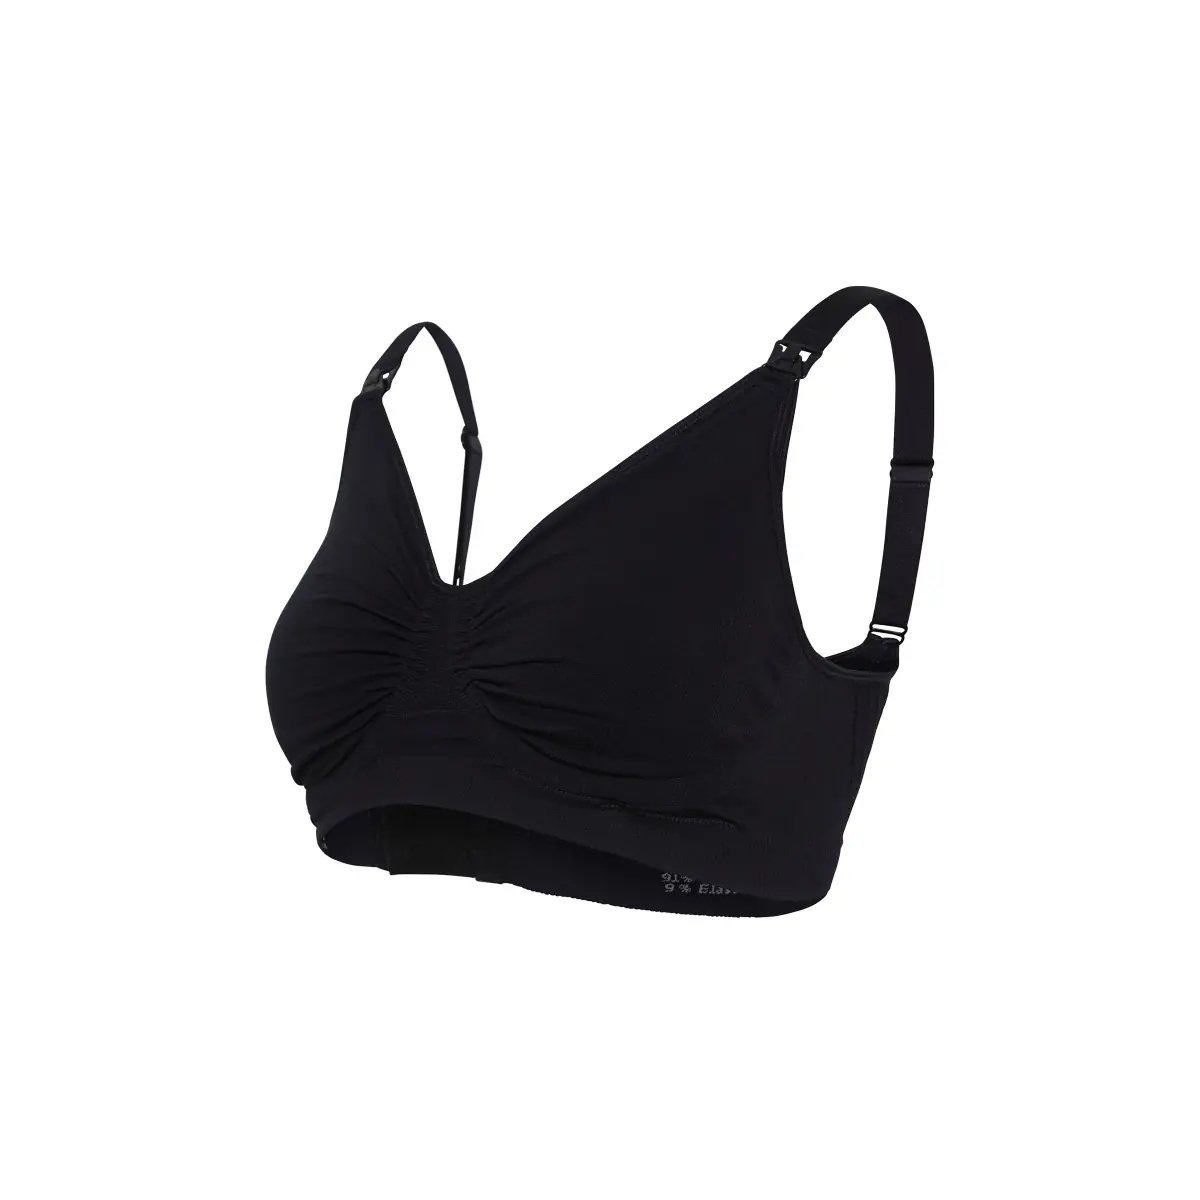 Carriwell Maternity & Nursing Bra with Padded Carri-Gel Support - Black ( Size - XX-LARGE)